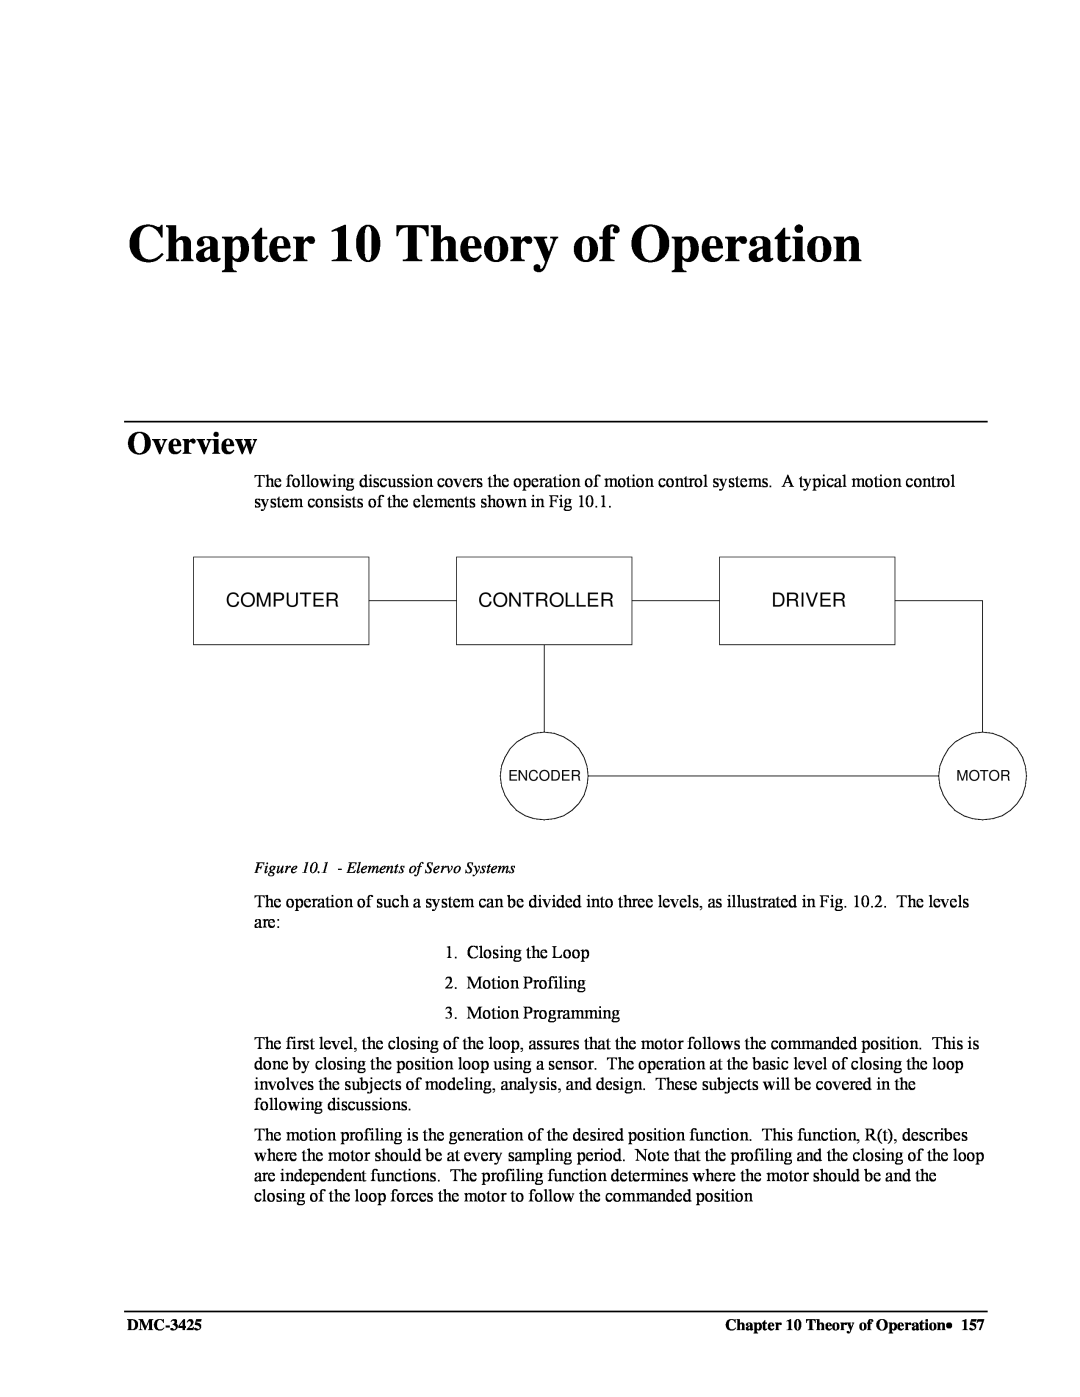 Galil DMC-3425 user manual Theory of Operation, Overview, Computer, Controller, Driver 